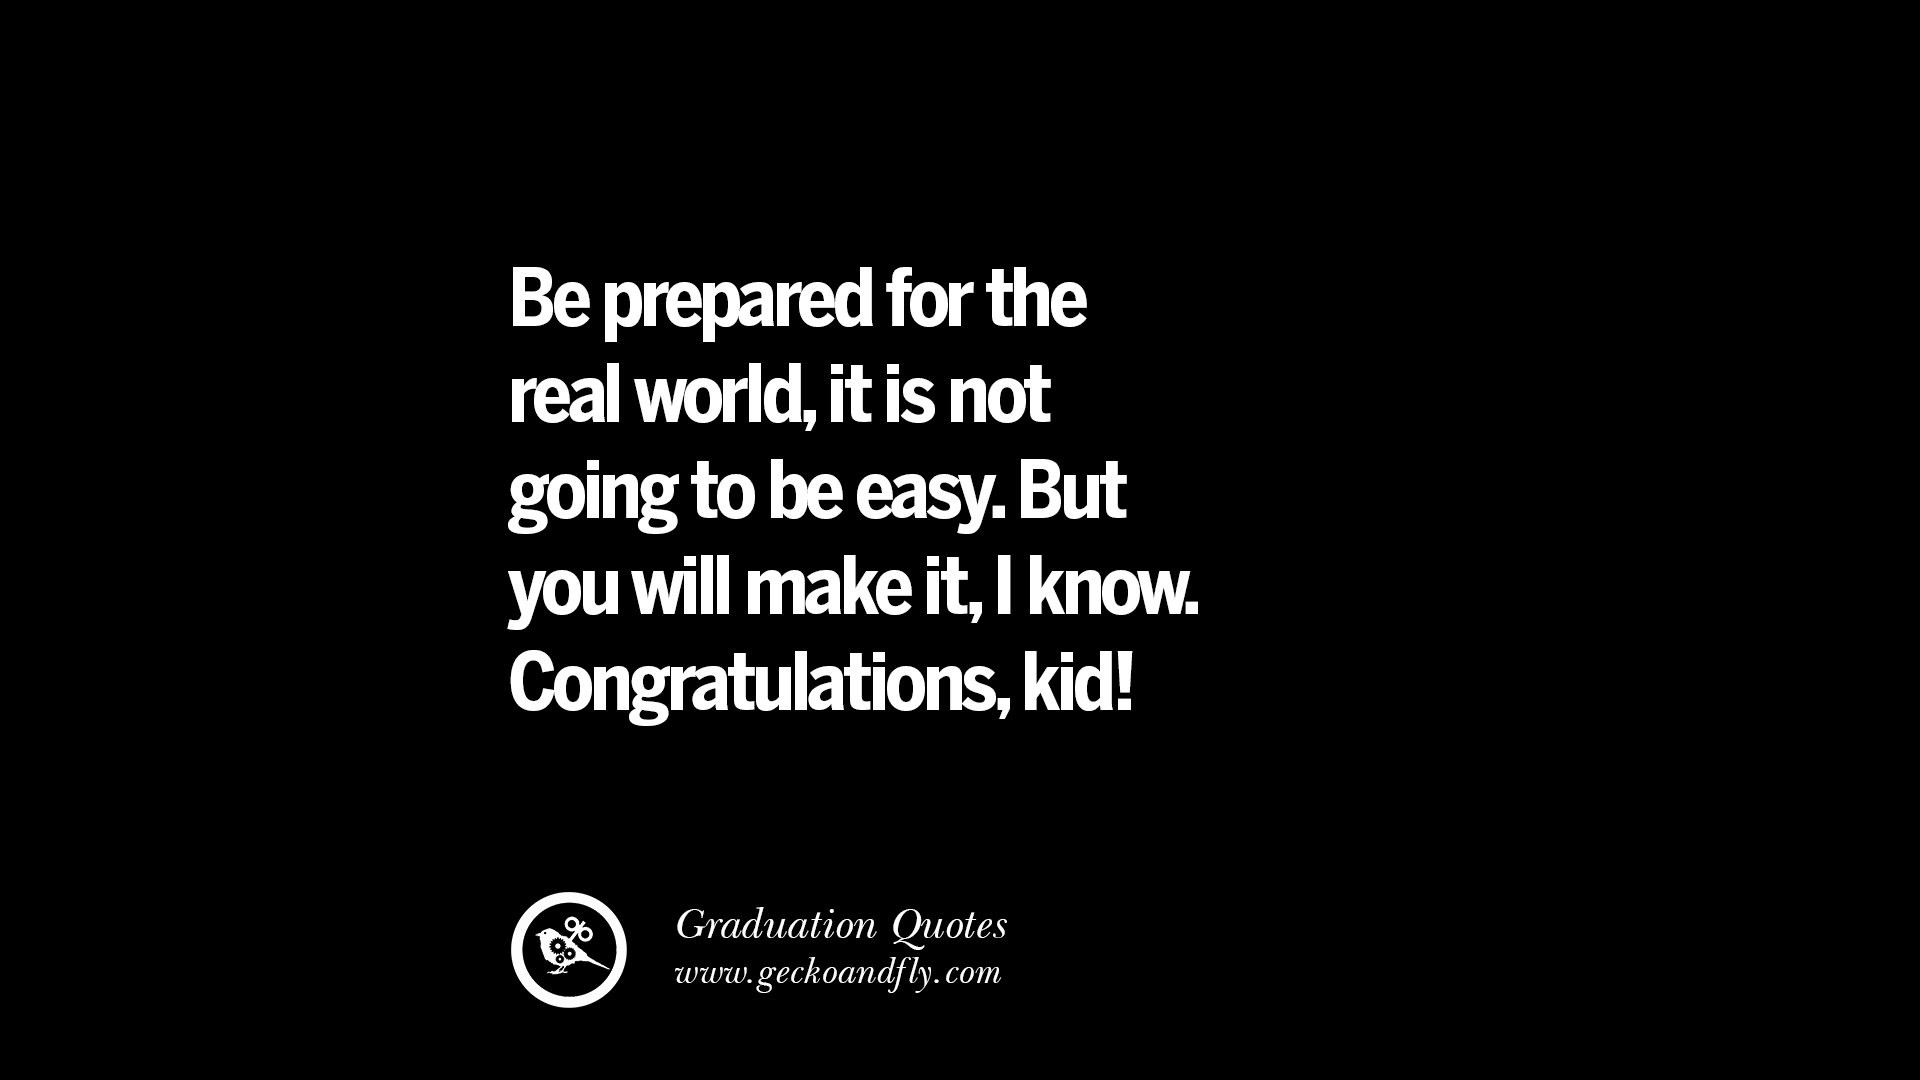 Inspirational Quotes For Graduation
 30 Empowering Graduation Quotes For University College